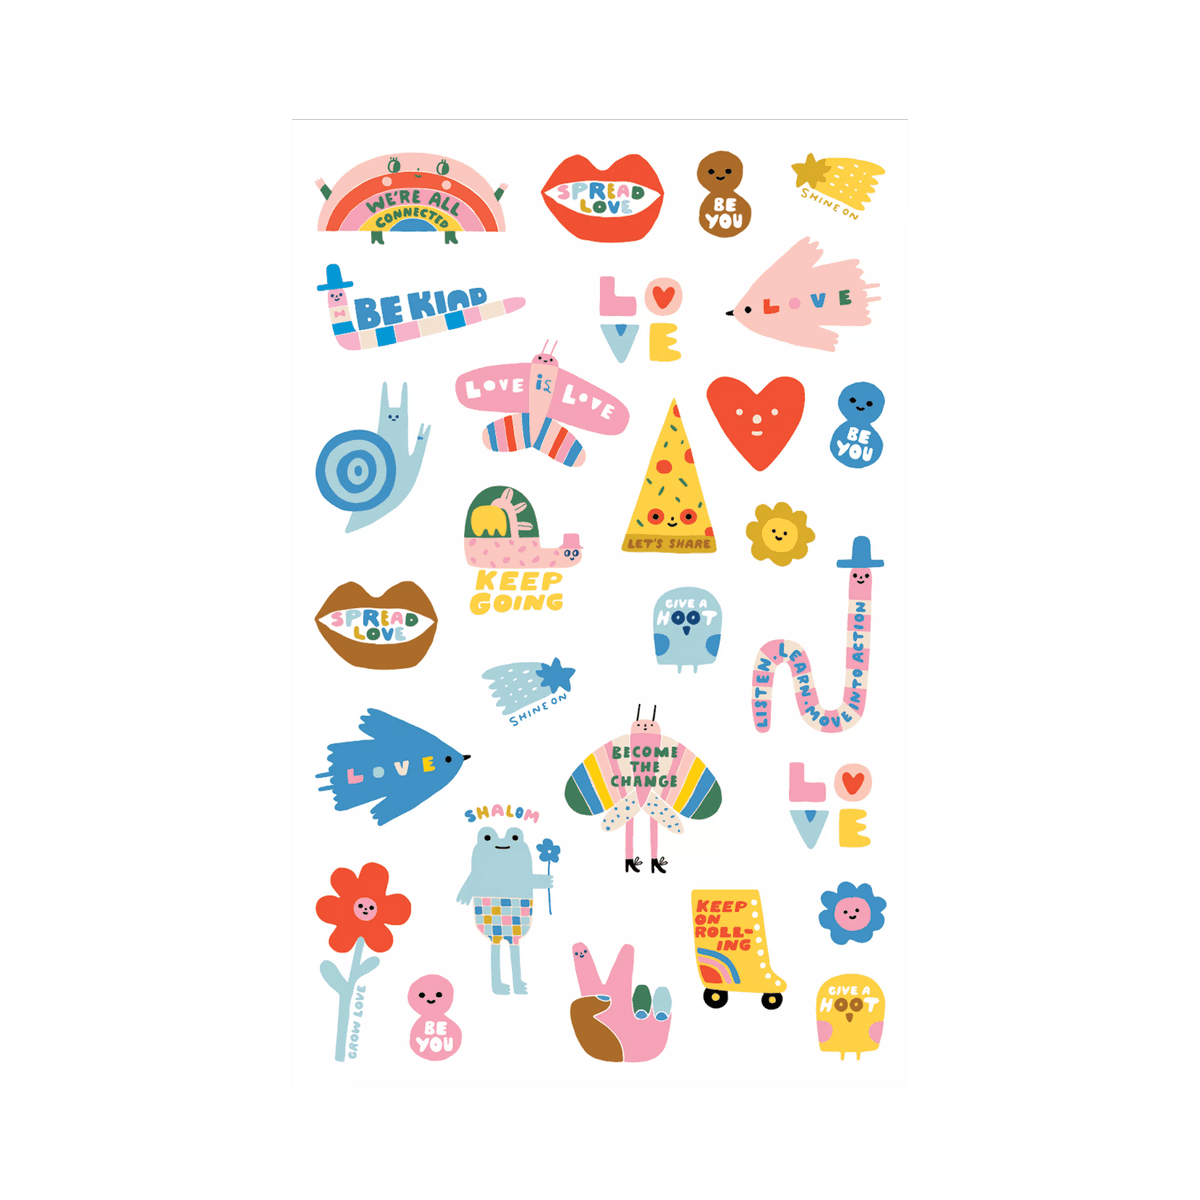 Stickiville Mini Mantras sticker sheet out of packaging